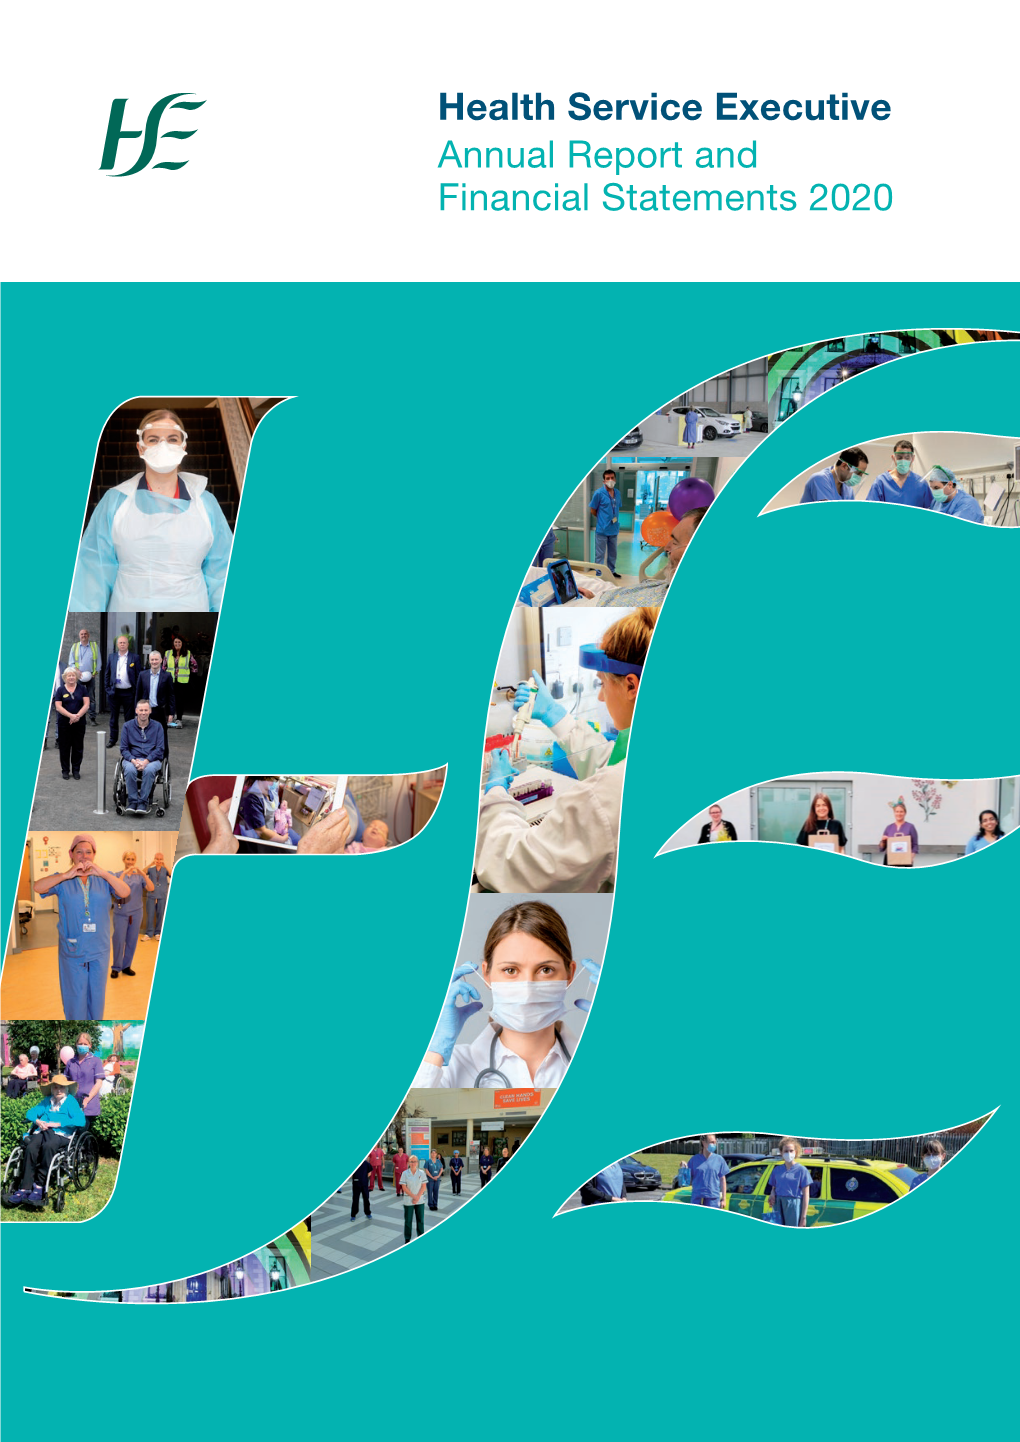 Health Service Executive Annual Report and Financial Statements 2020 Health Service Executive Annual Report and Financial Statements 2020 About This Report